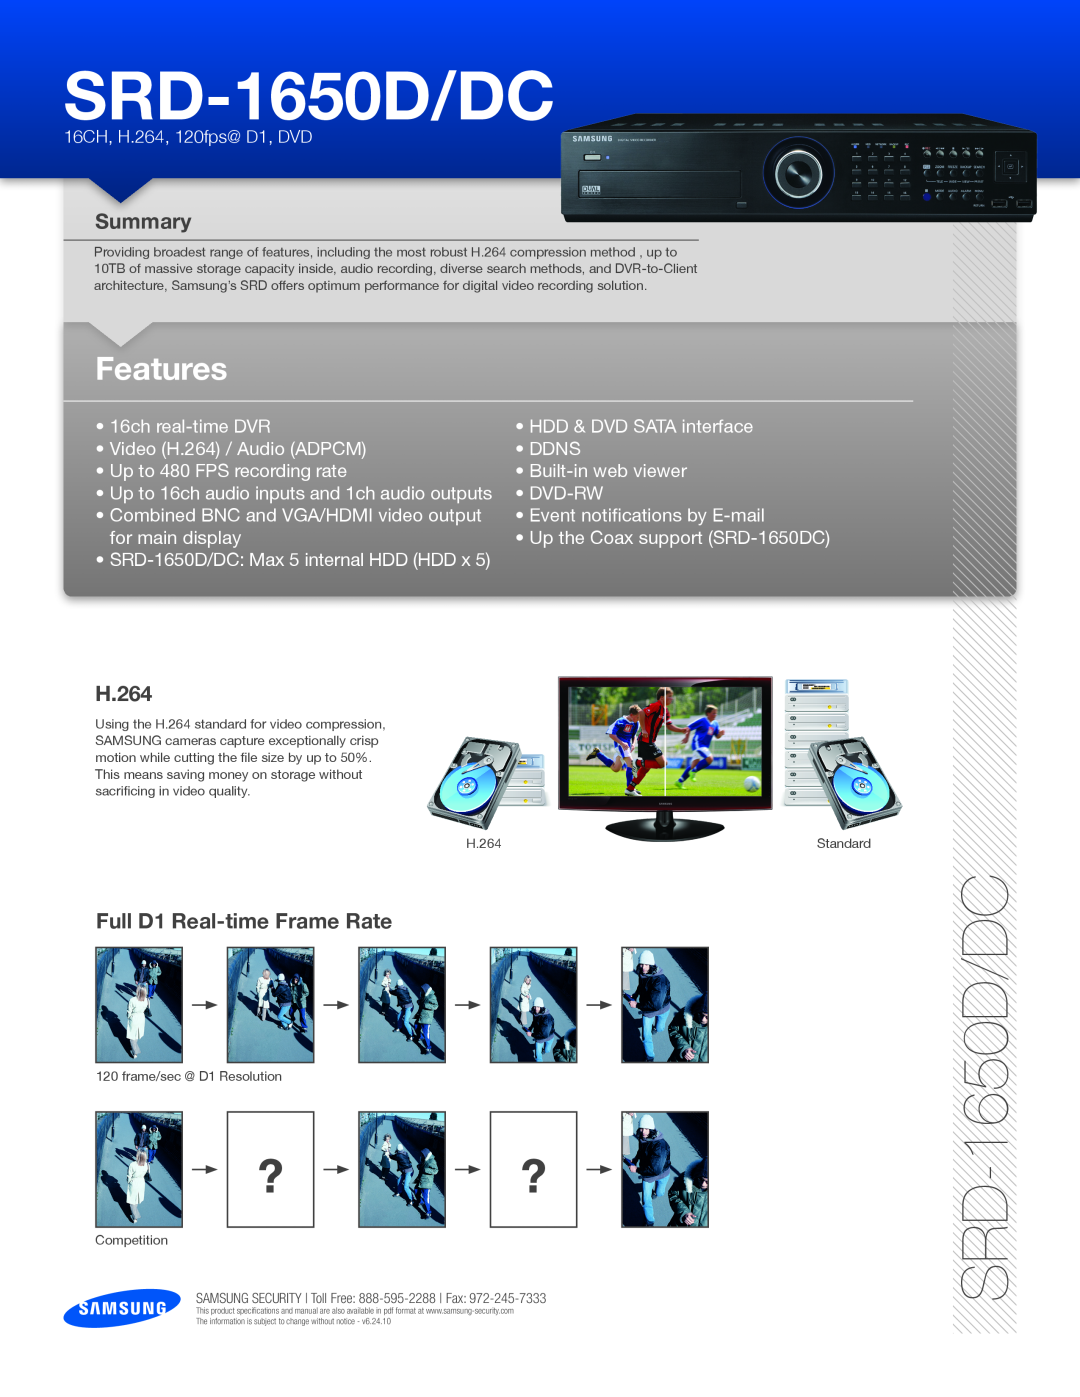 Samsung SRD-1650D/DC specifications Summary, H.264, Full D1 Real-time Frame Rate, ? ?, Features 